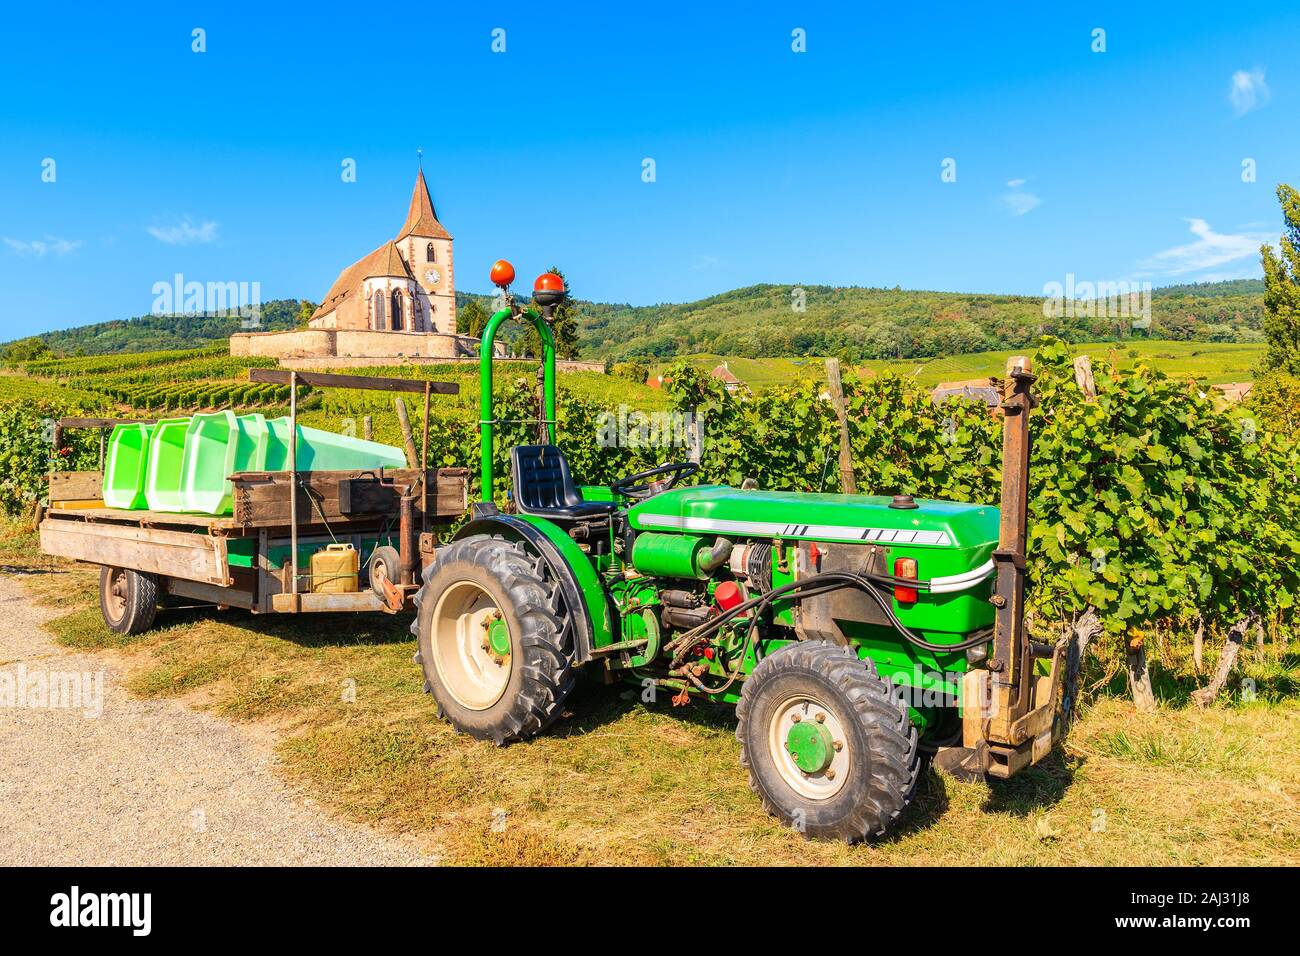 Tractor with trailer for harvesting grapes near picturesque church in famous Hunawihr village, Alsace Wine Route, France Stock Photo